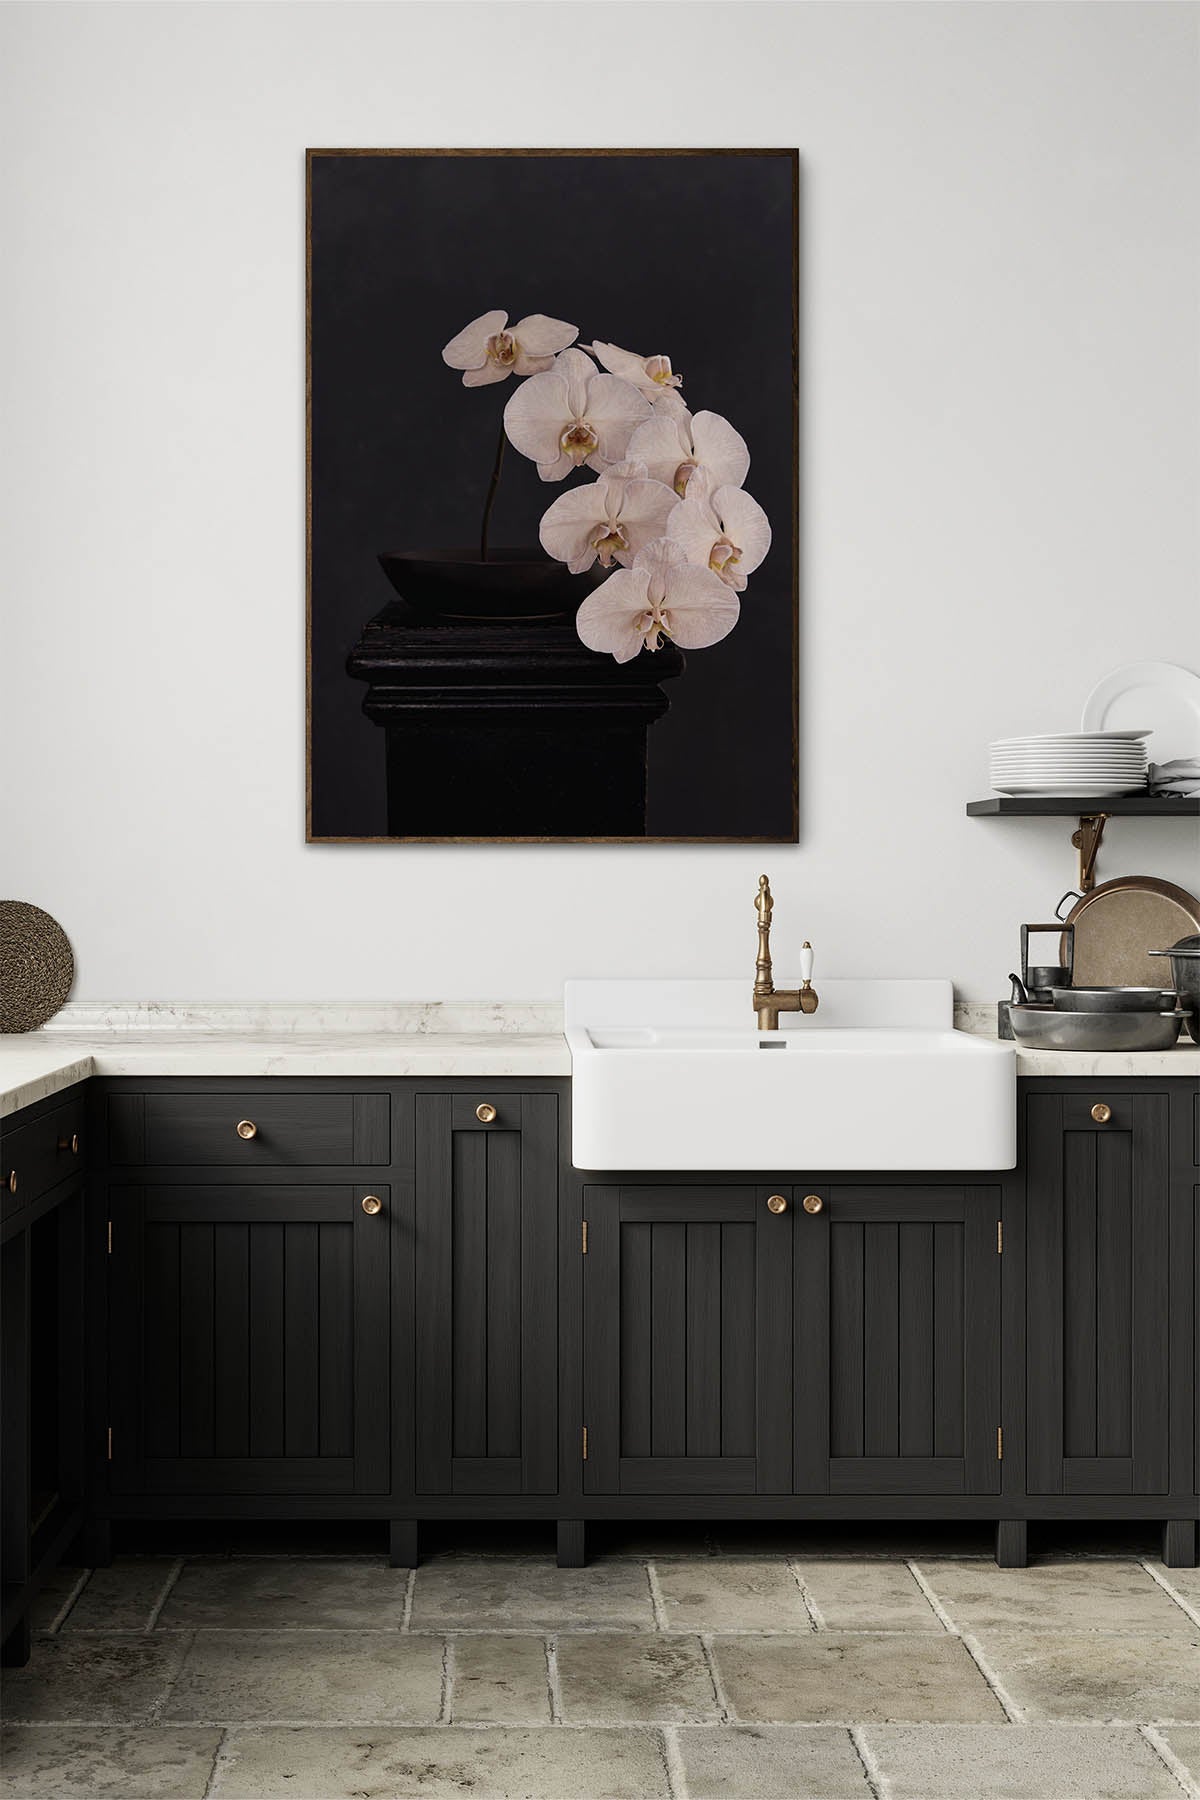 Fine Art Print Of A White Phaleanopsis Stem In A Black Bowl On A Black Mantle In A Rustic Kitchen